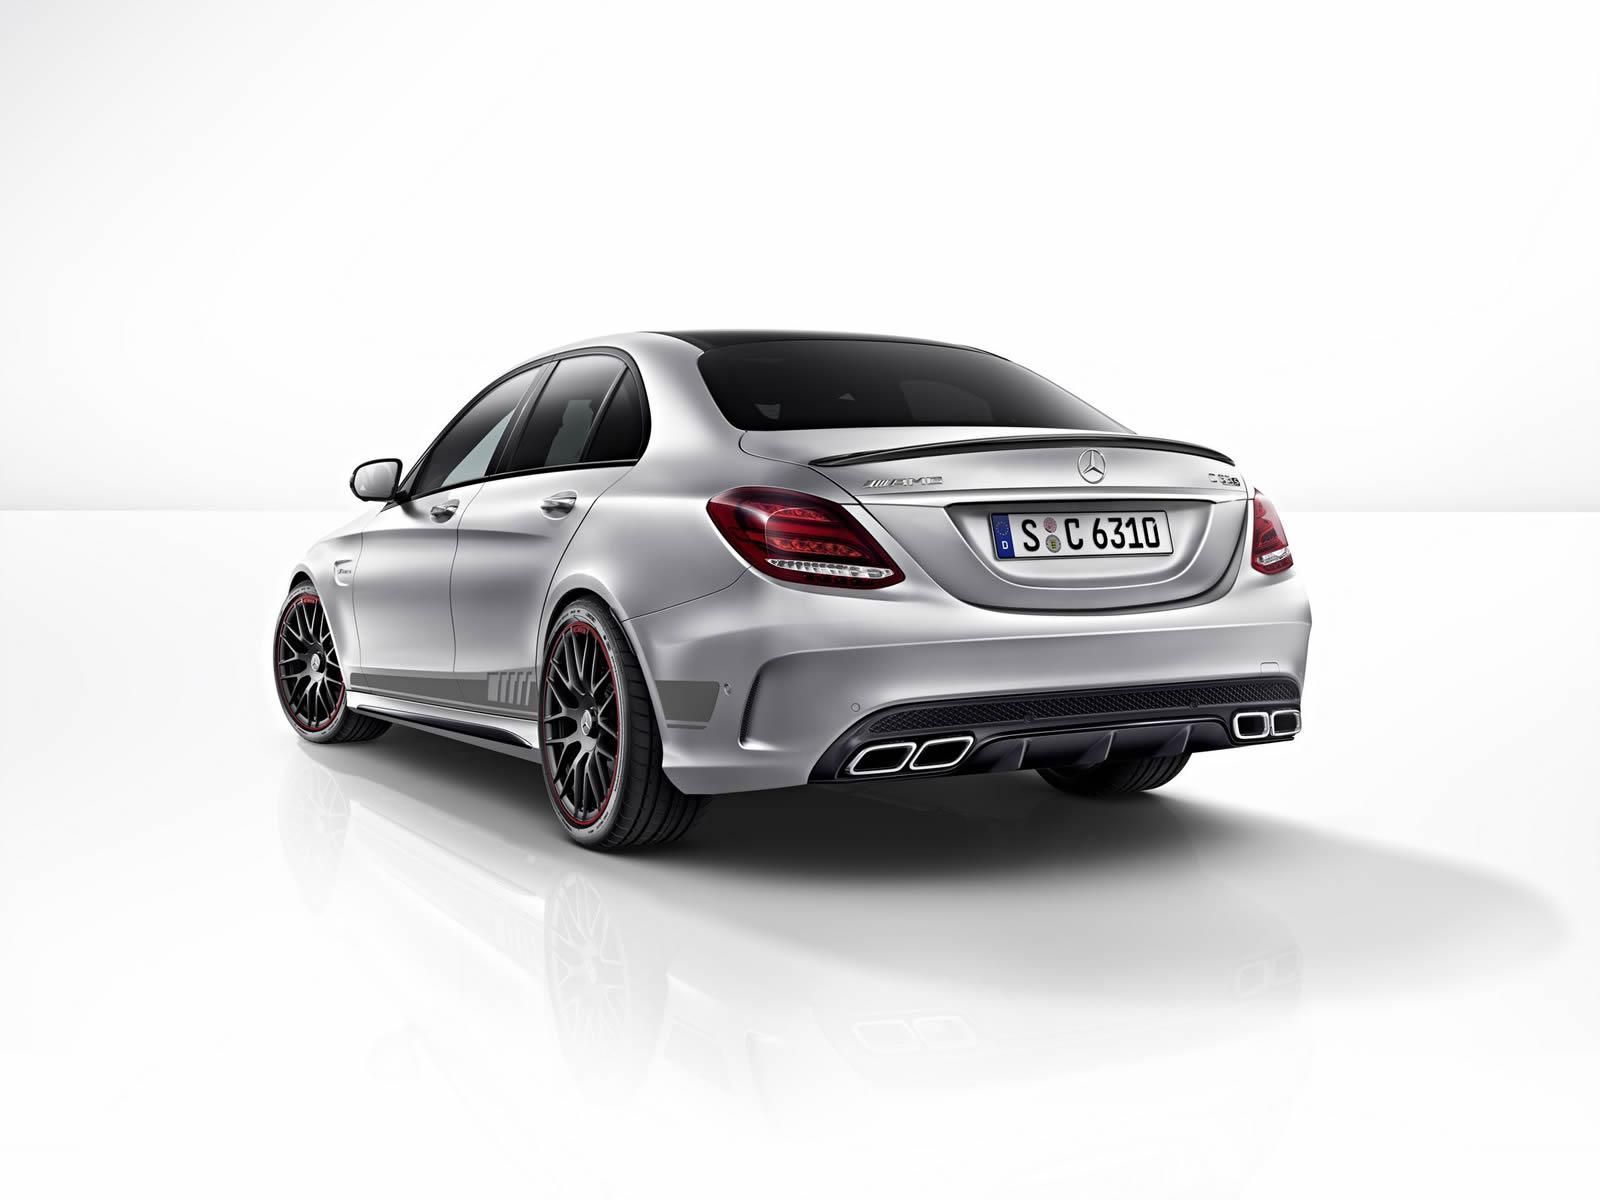 MERCEDES C63 AMG S EDTON 1 RESM GALERS